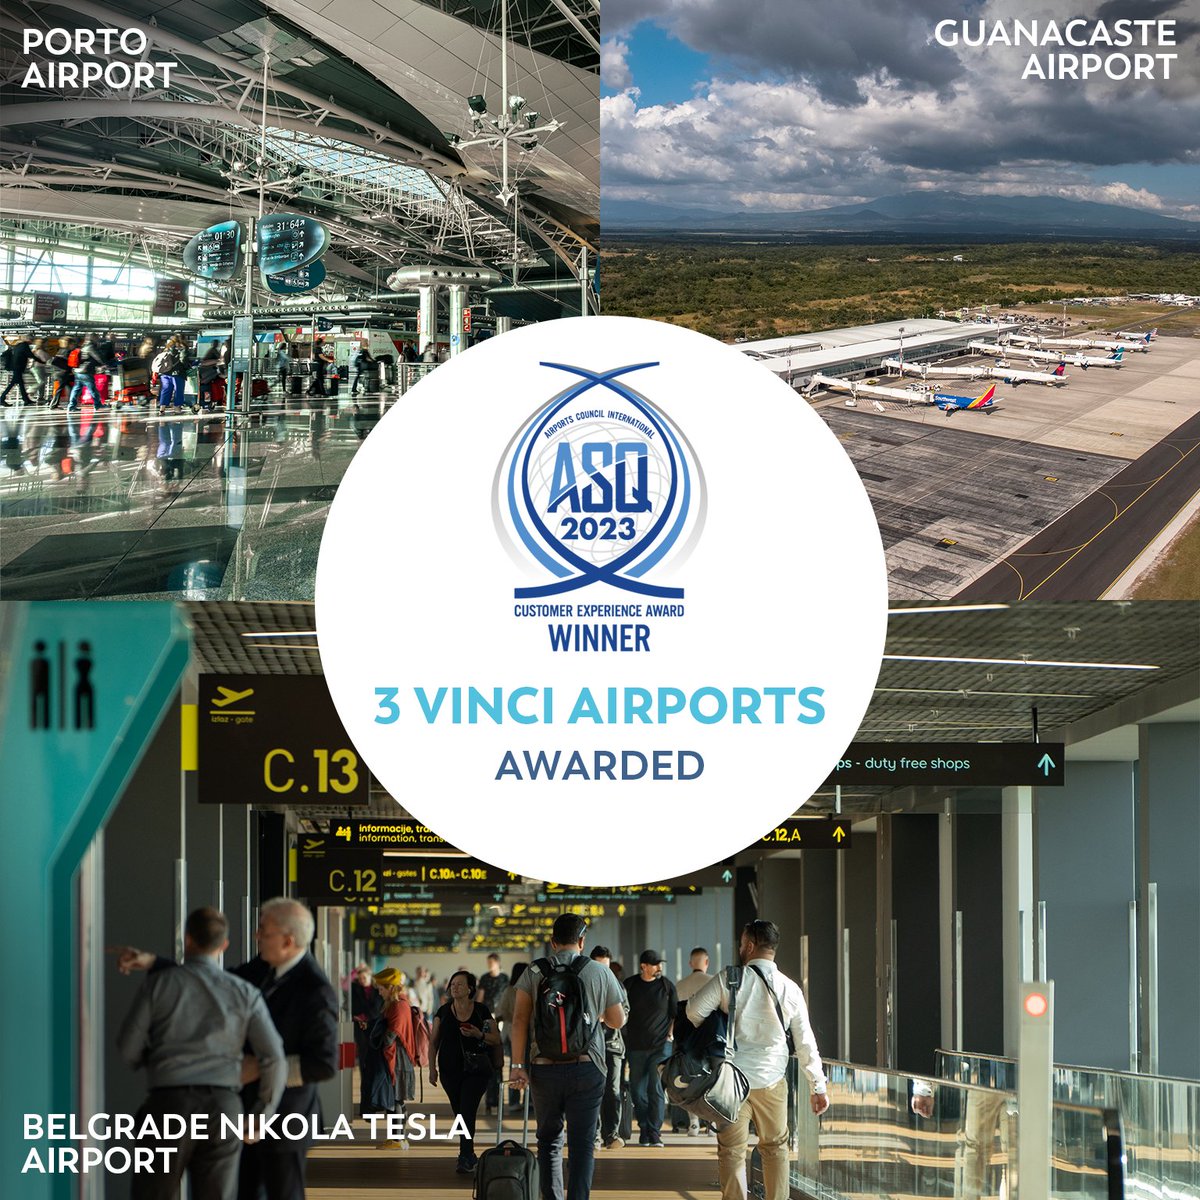 Passengers have spoken! Very proud to announce that Belgrade, Porto & Guanacaste airports, all 3 part of our network, have been singled out by @ACIWorld as among the best airports in the world in their category for quality of service✈️ 👉bit.ly/3PdJUlG #PositiveMobility